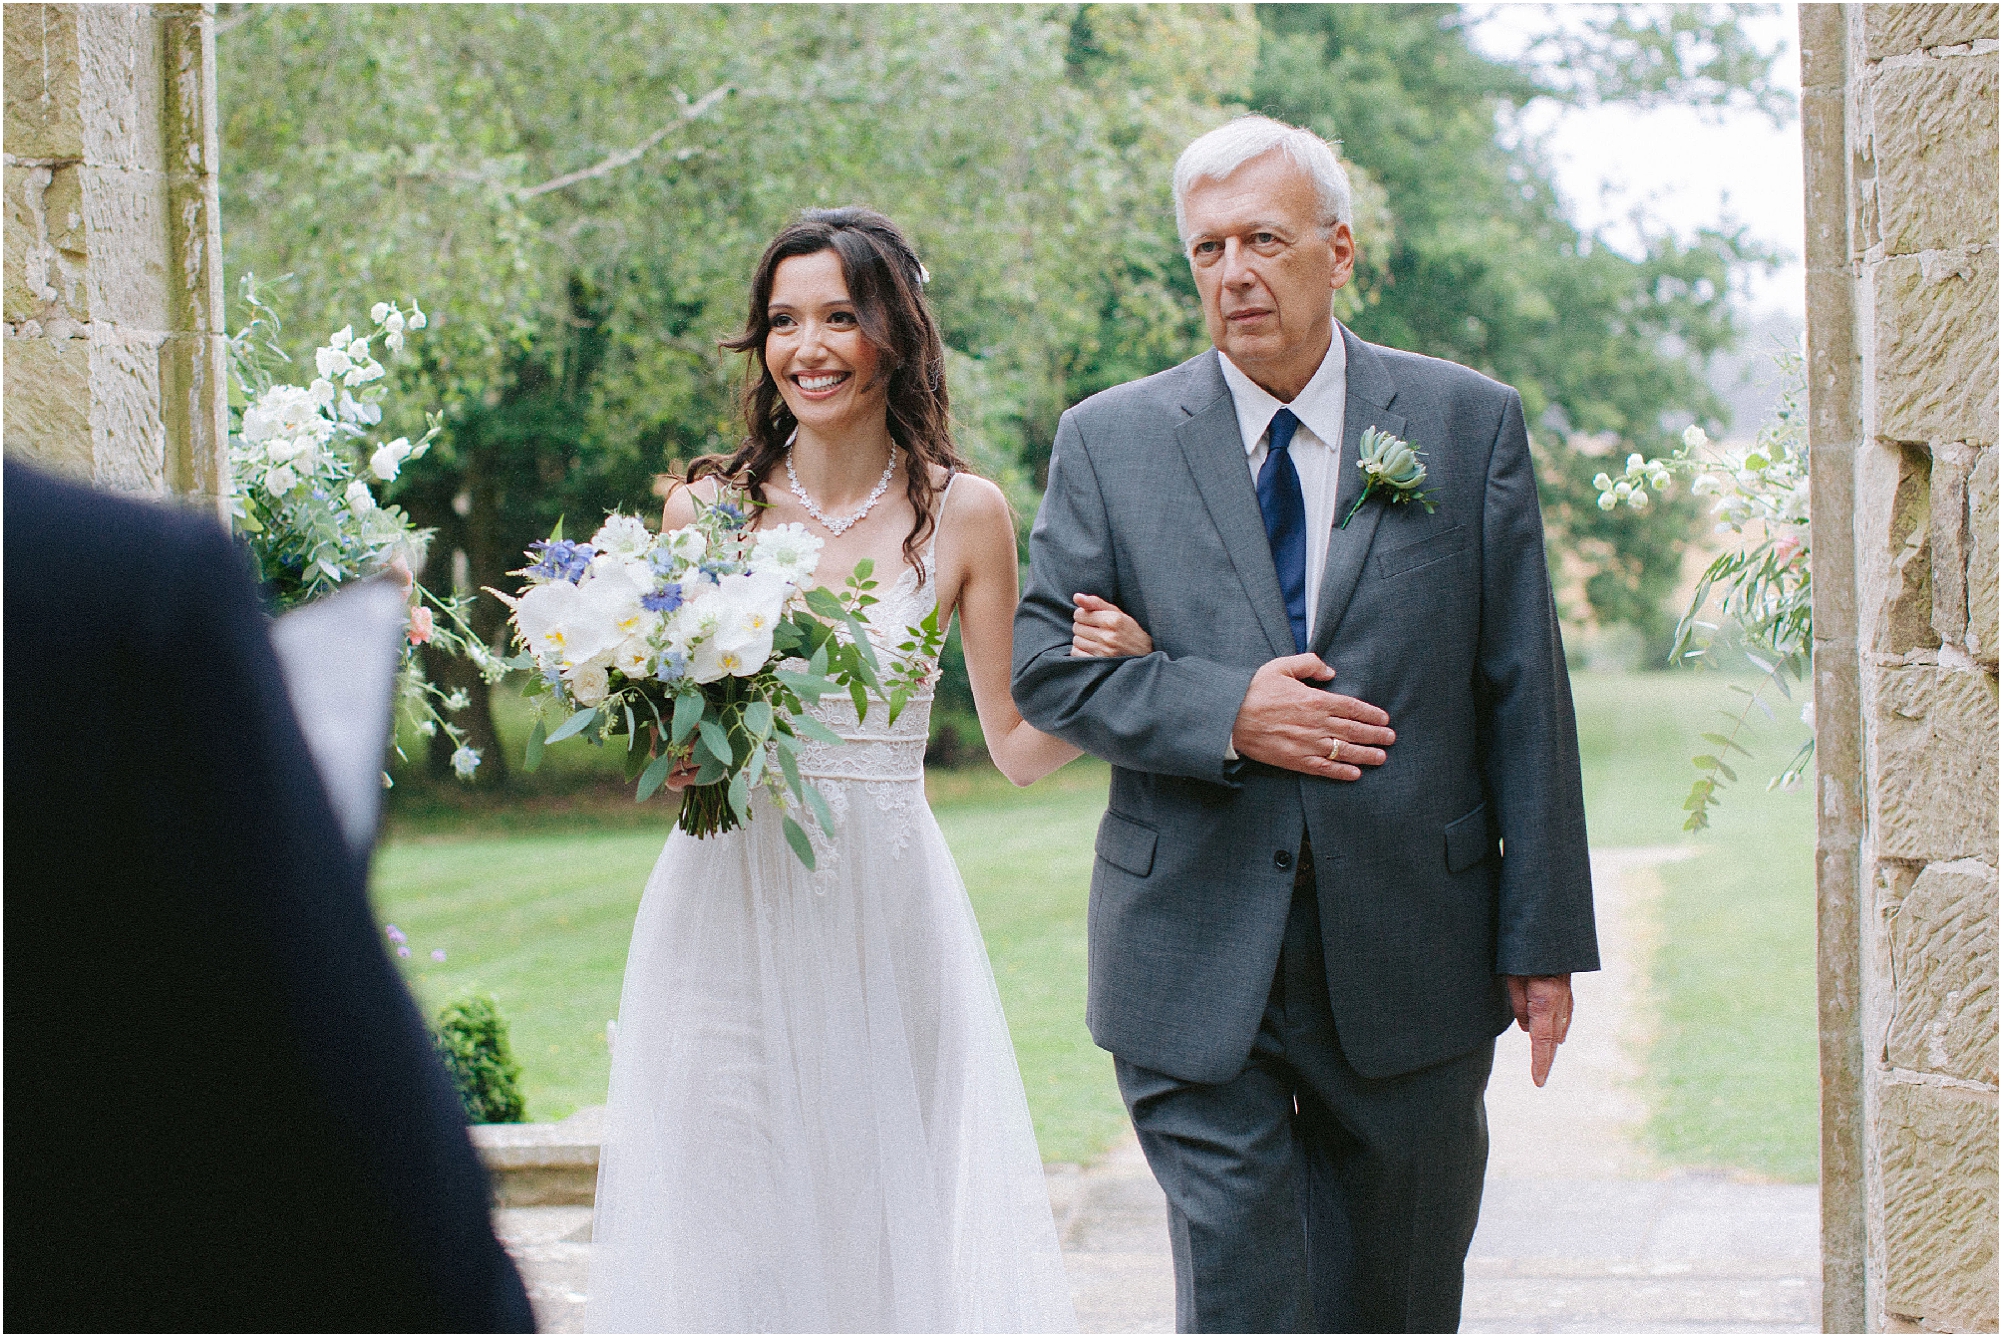 Bride walking into wedding ceremony escorted by her father at Chiddingstone Castle wedding